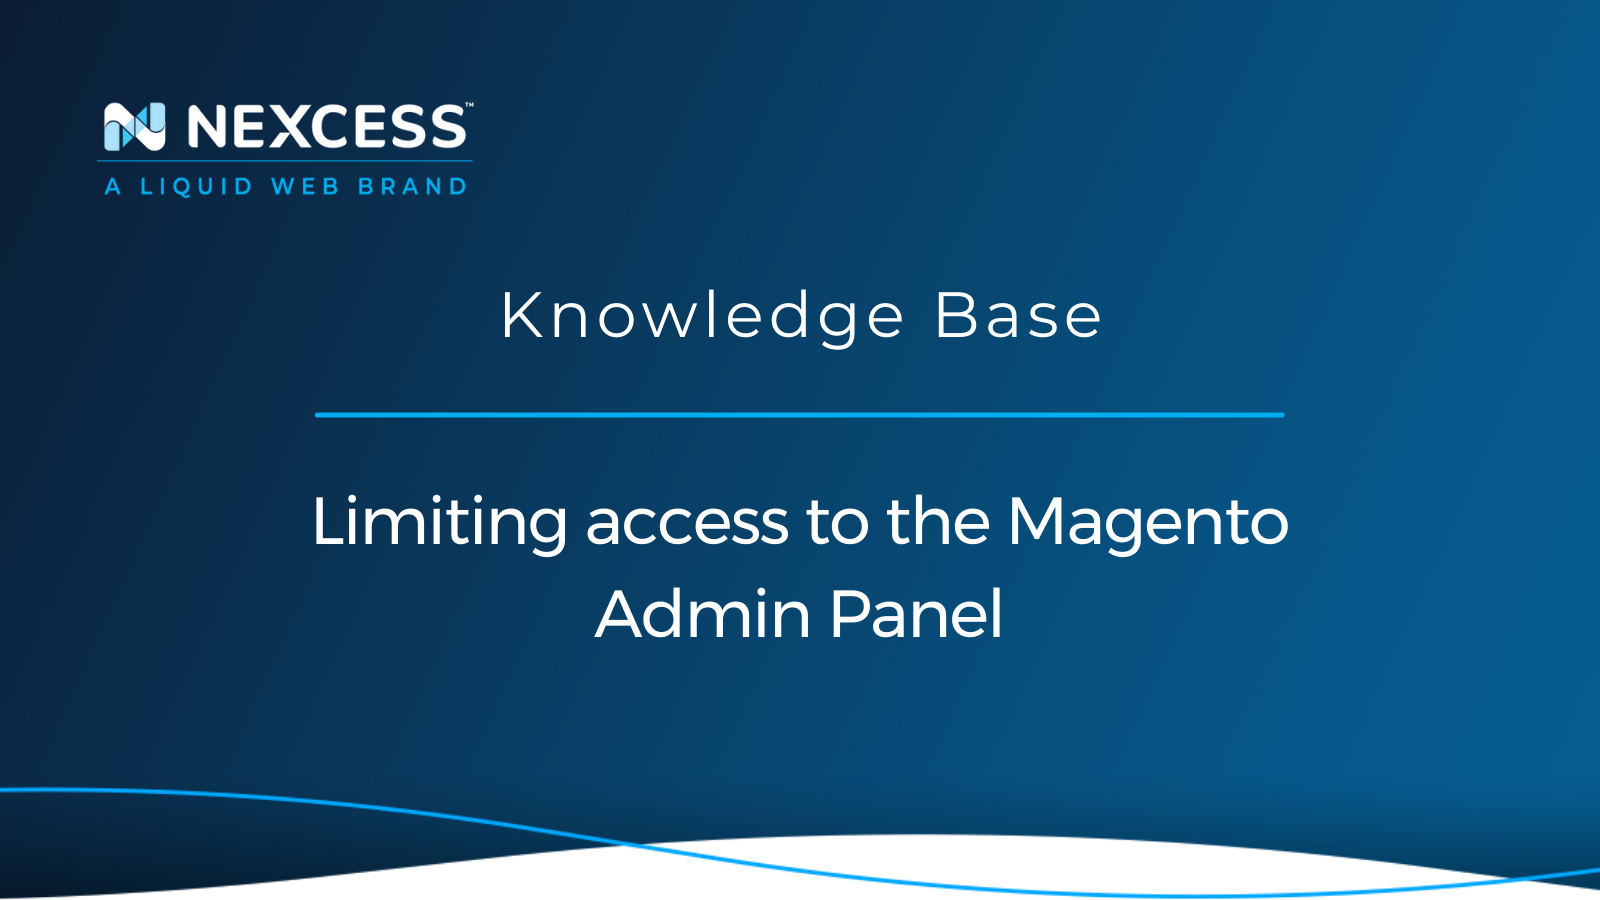 Limiting access to the Magento Admin Panel